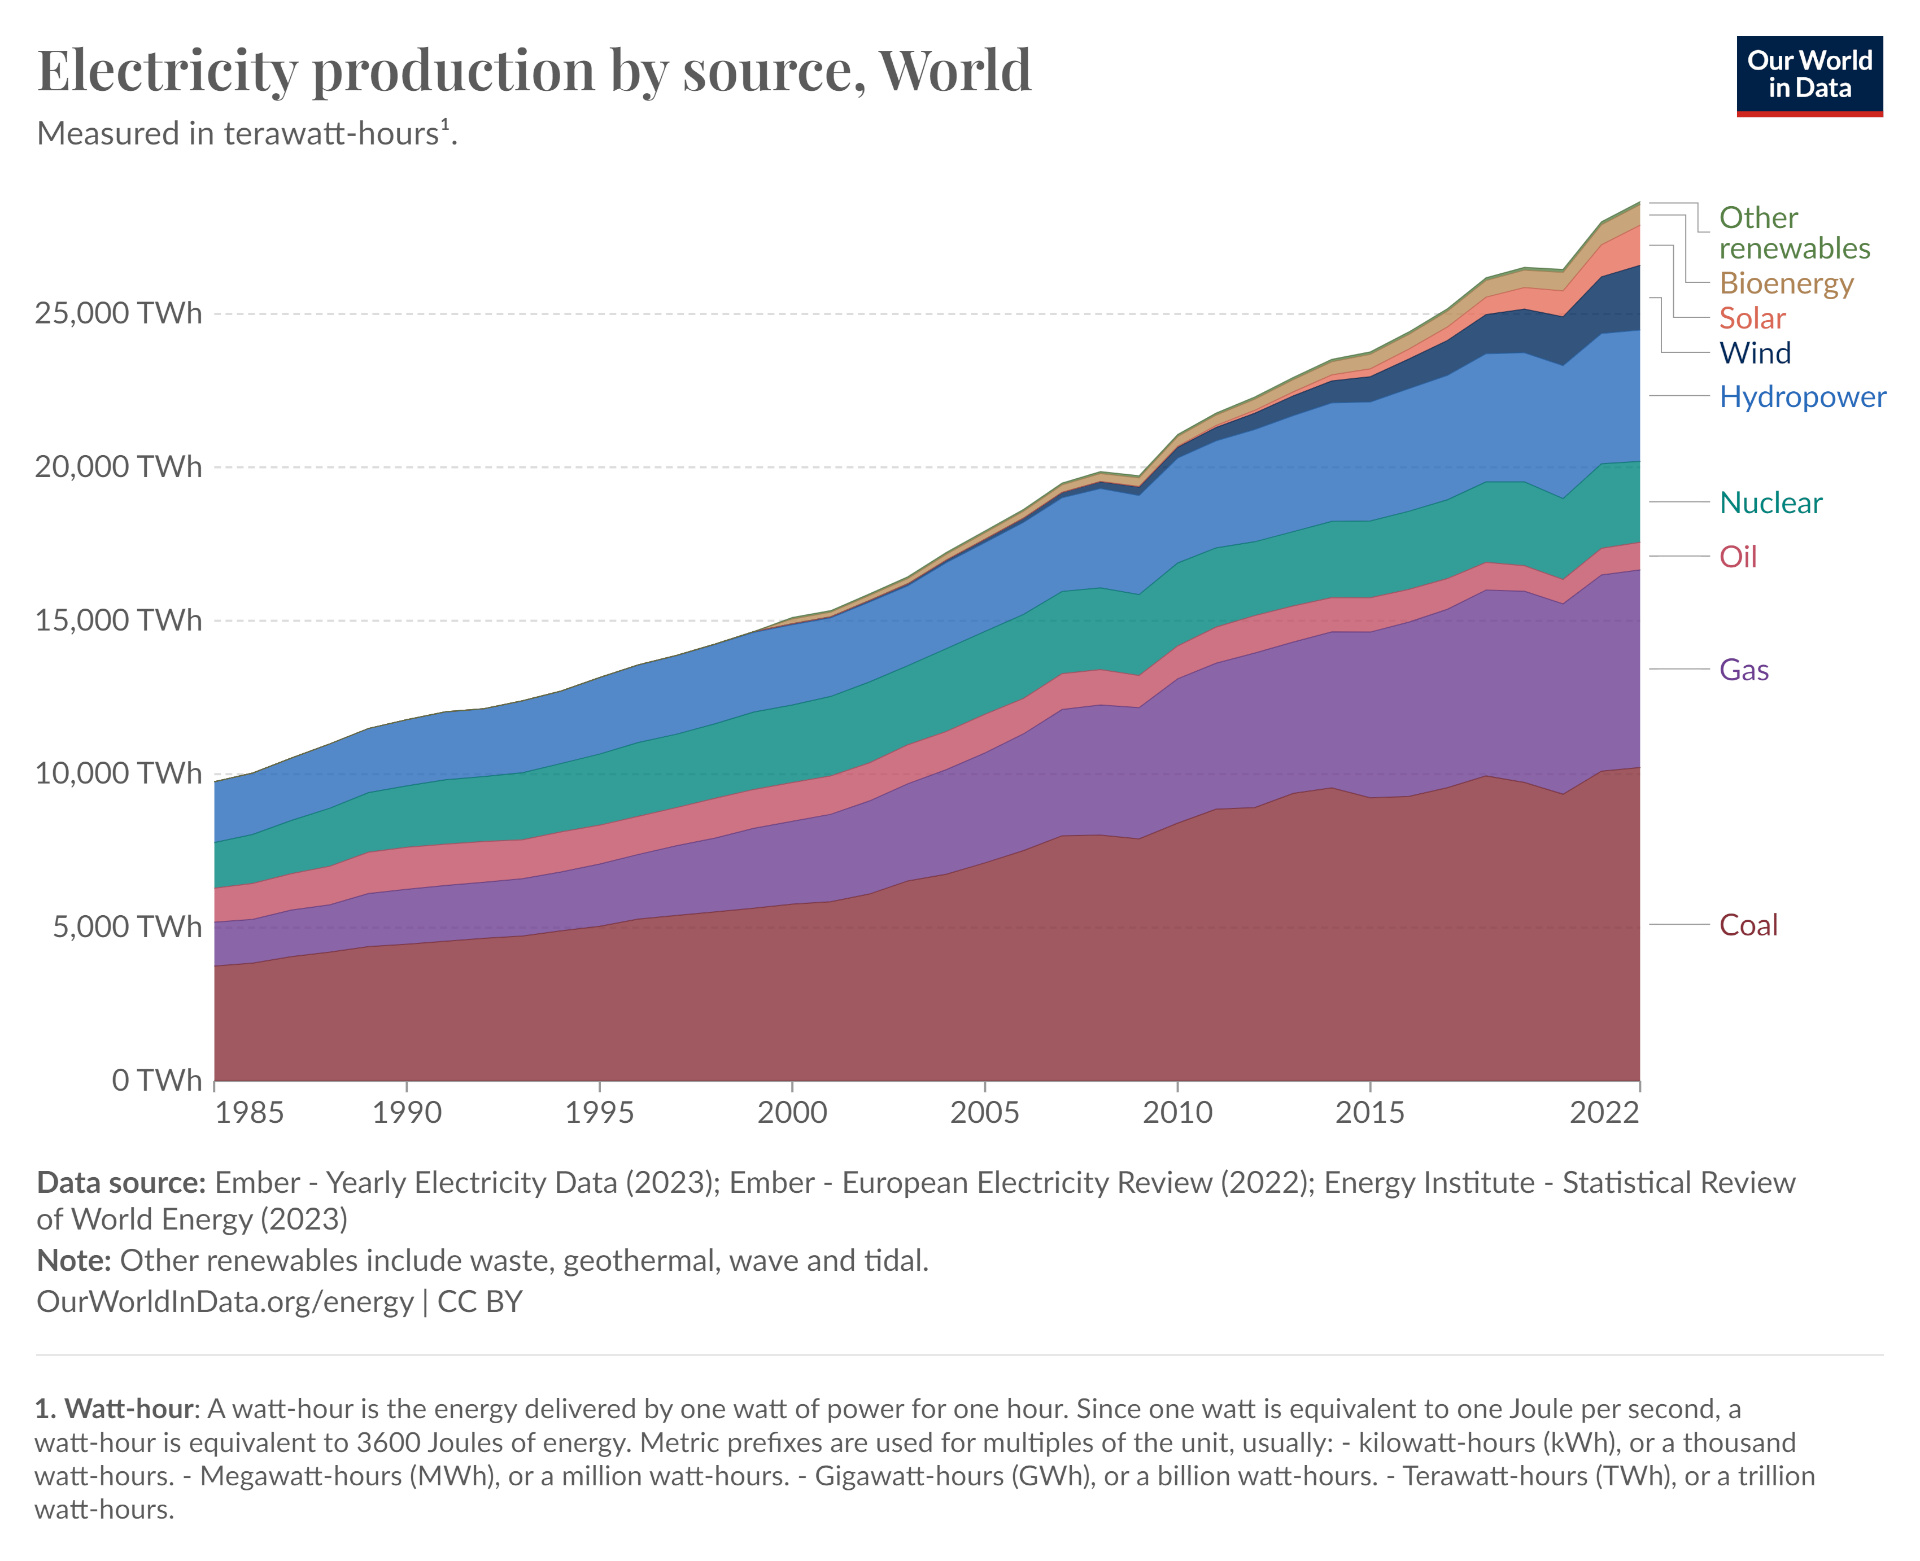 Electricity production by source, world (source: Our World in Data)